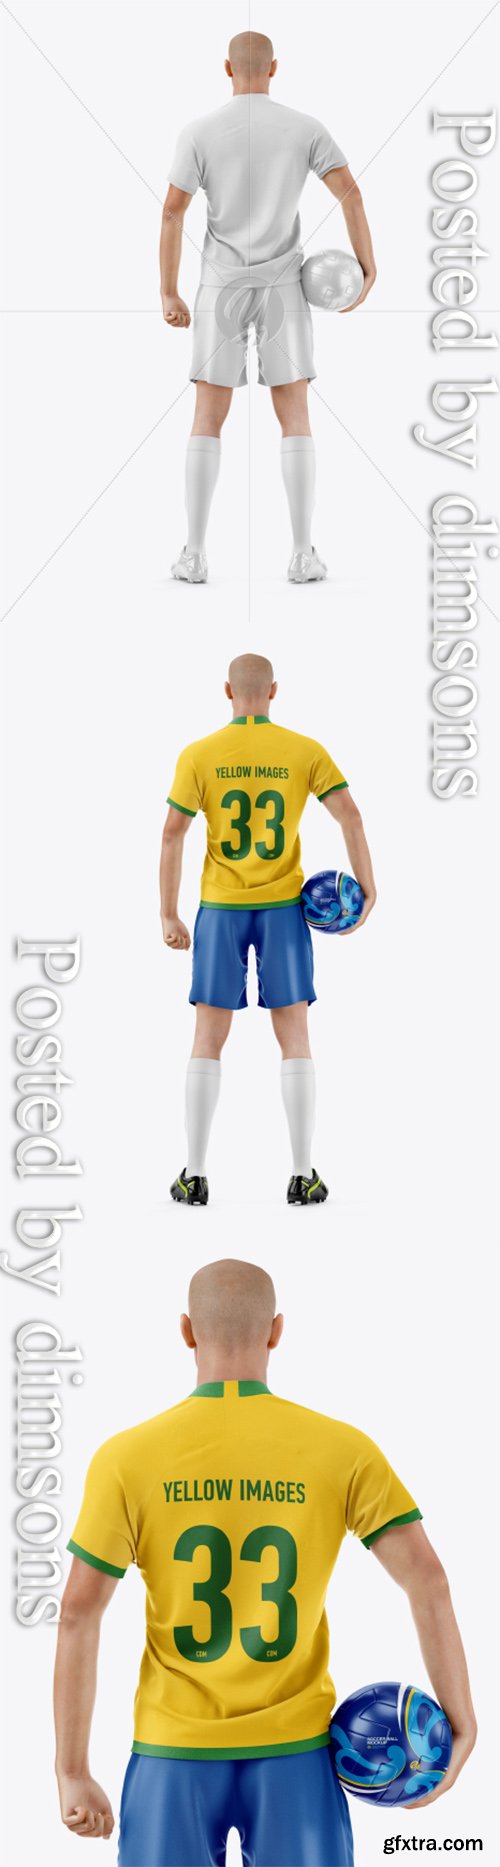 Soccer Player with Ball Mockup 41273